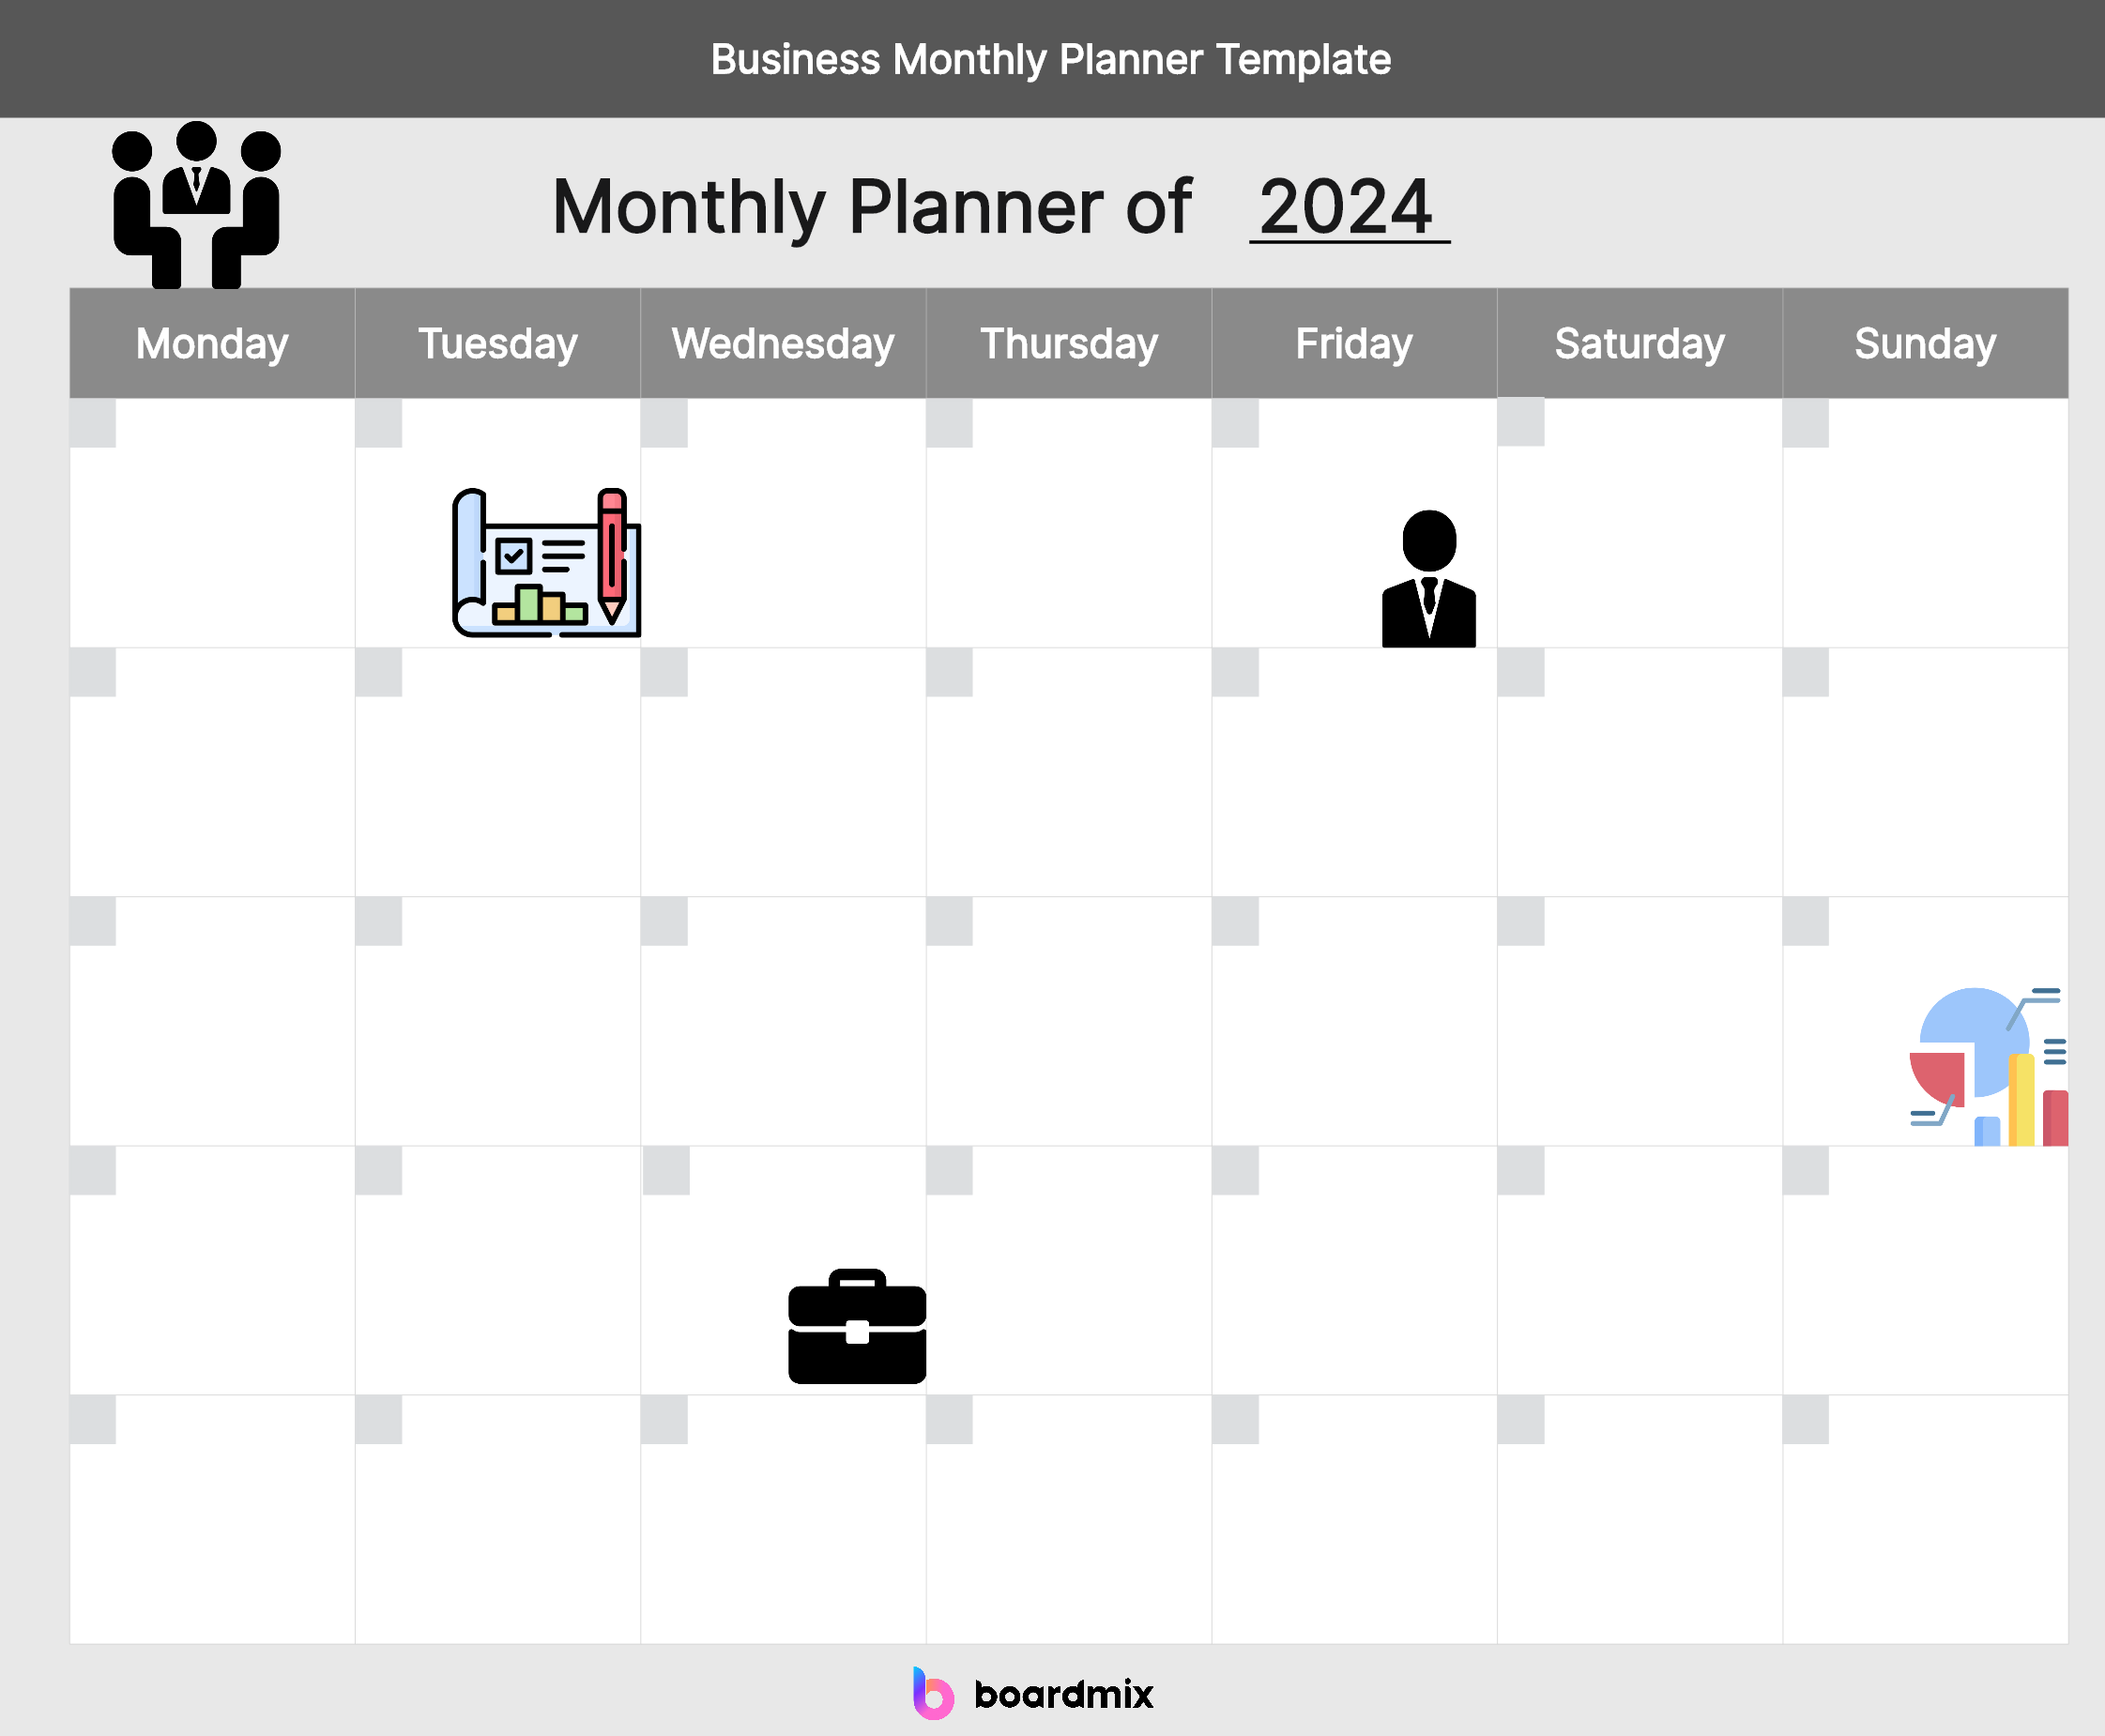 business-monthly-planner-template.png